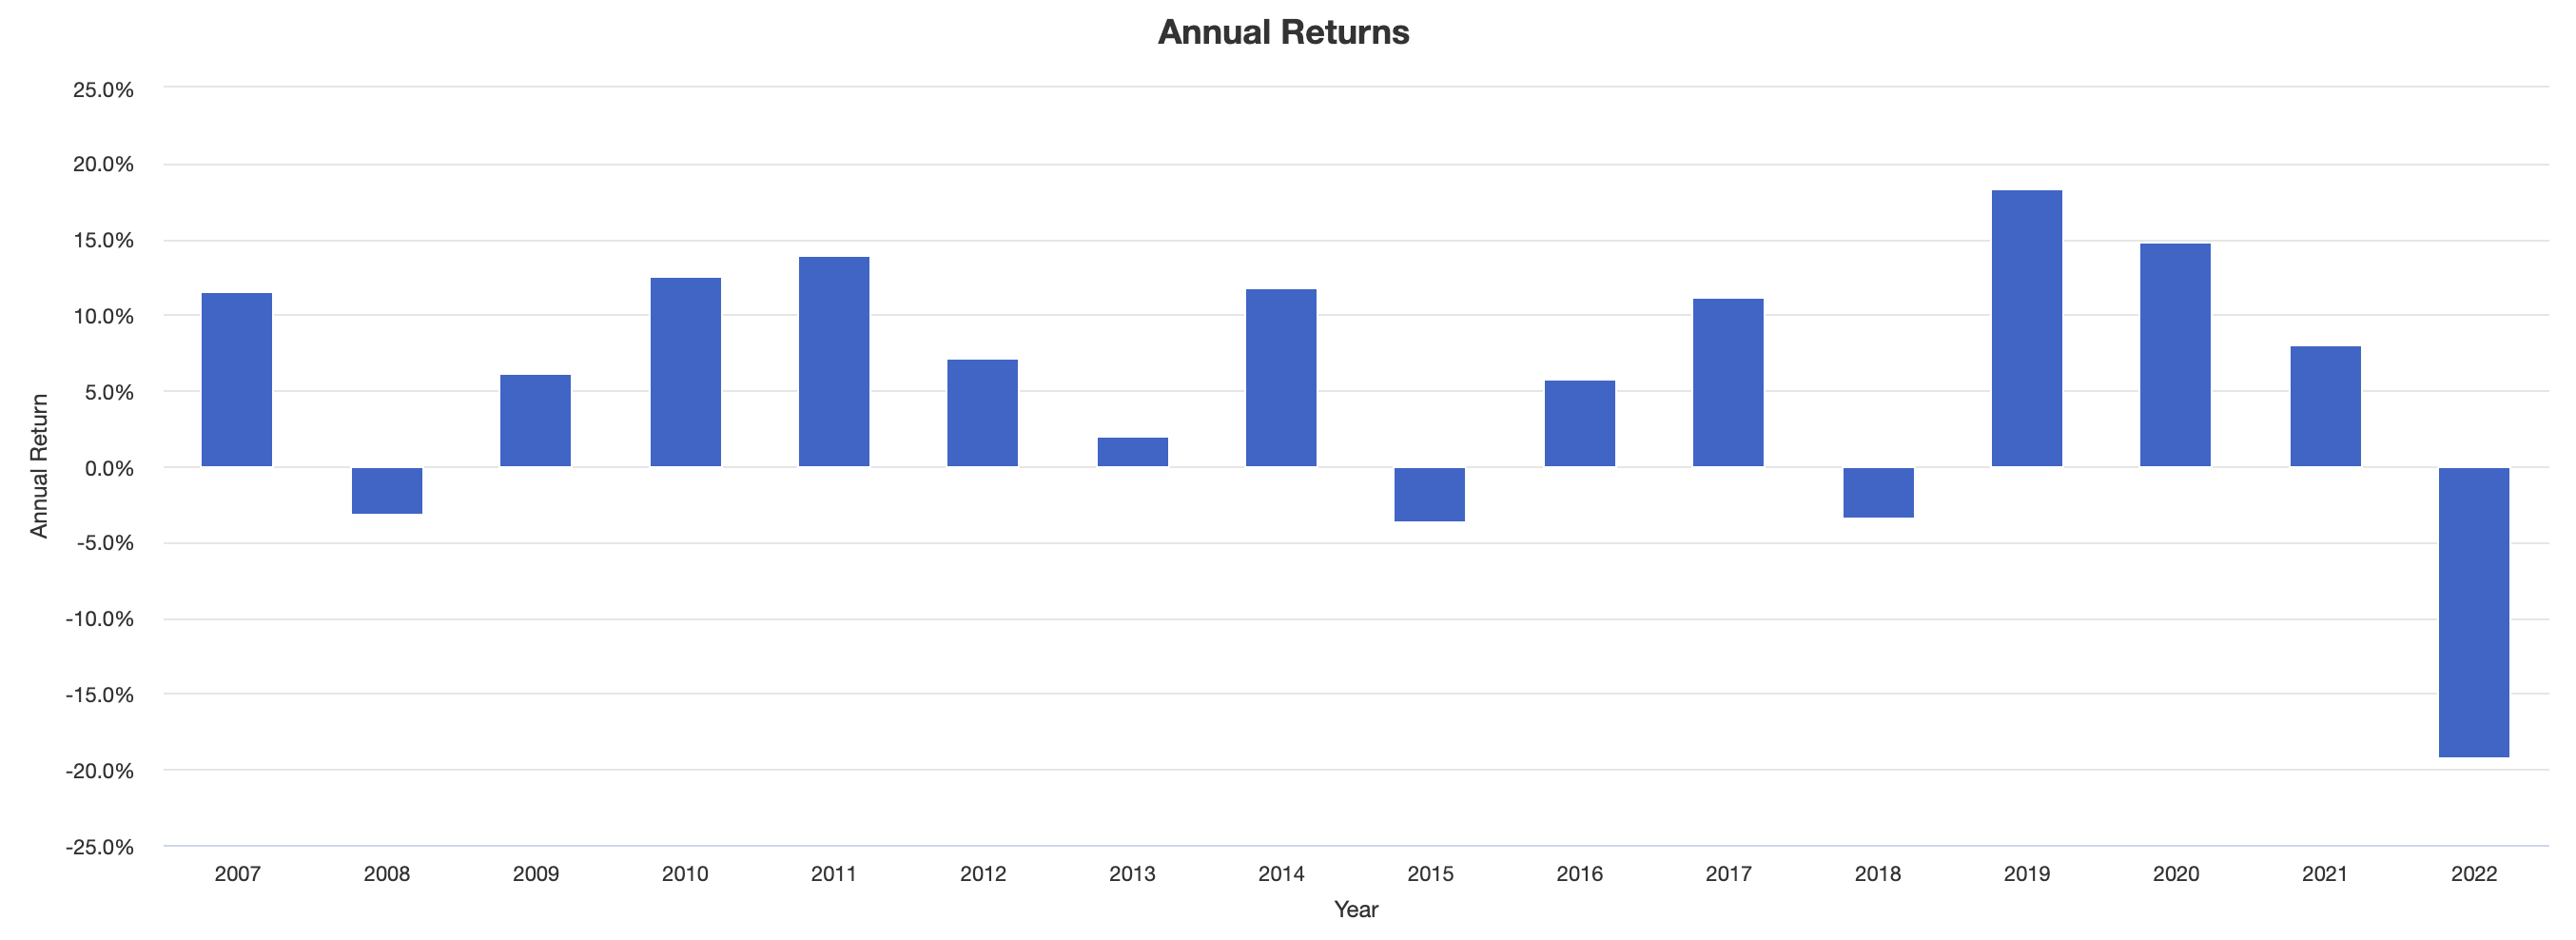 Ray Dalio All Weather Annual Returns 